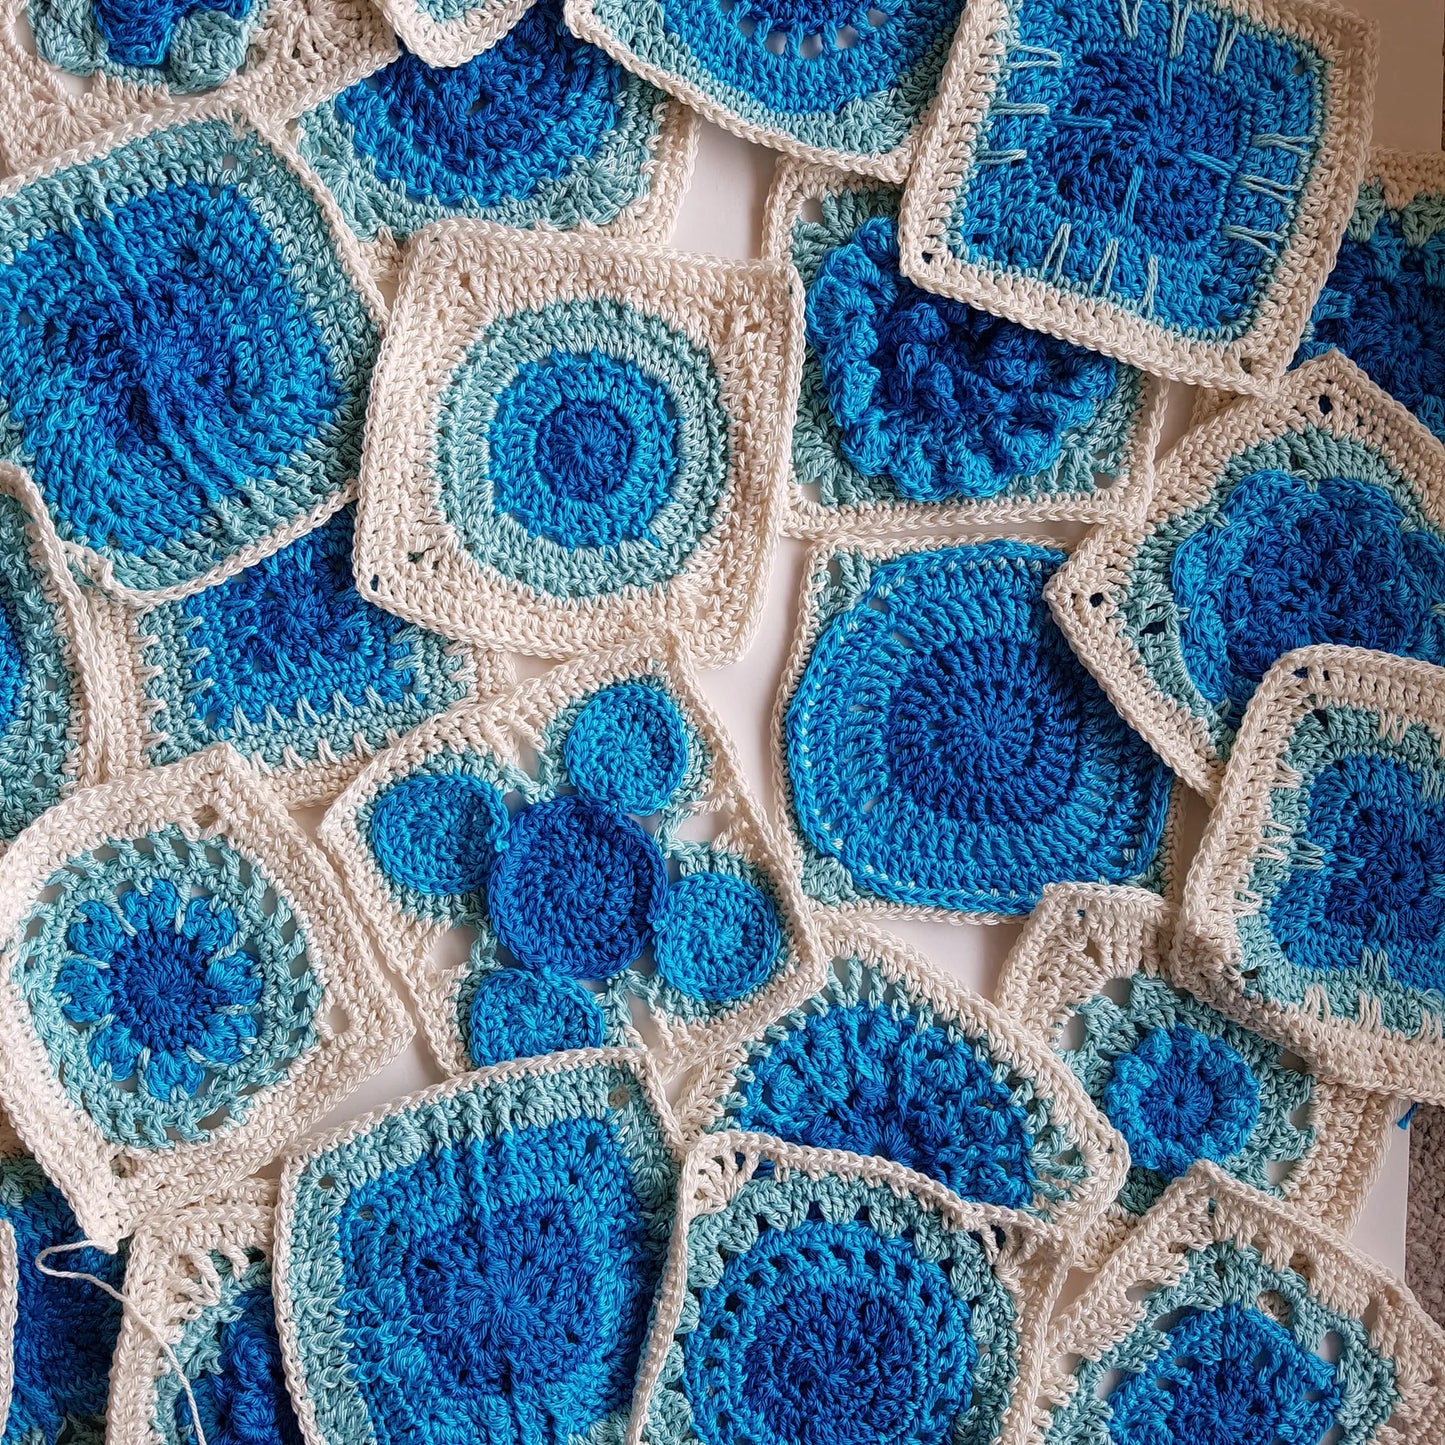 Granny Square Flair by Shelley Husband